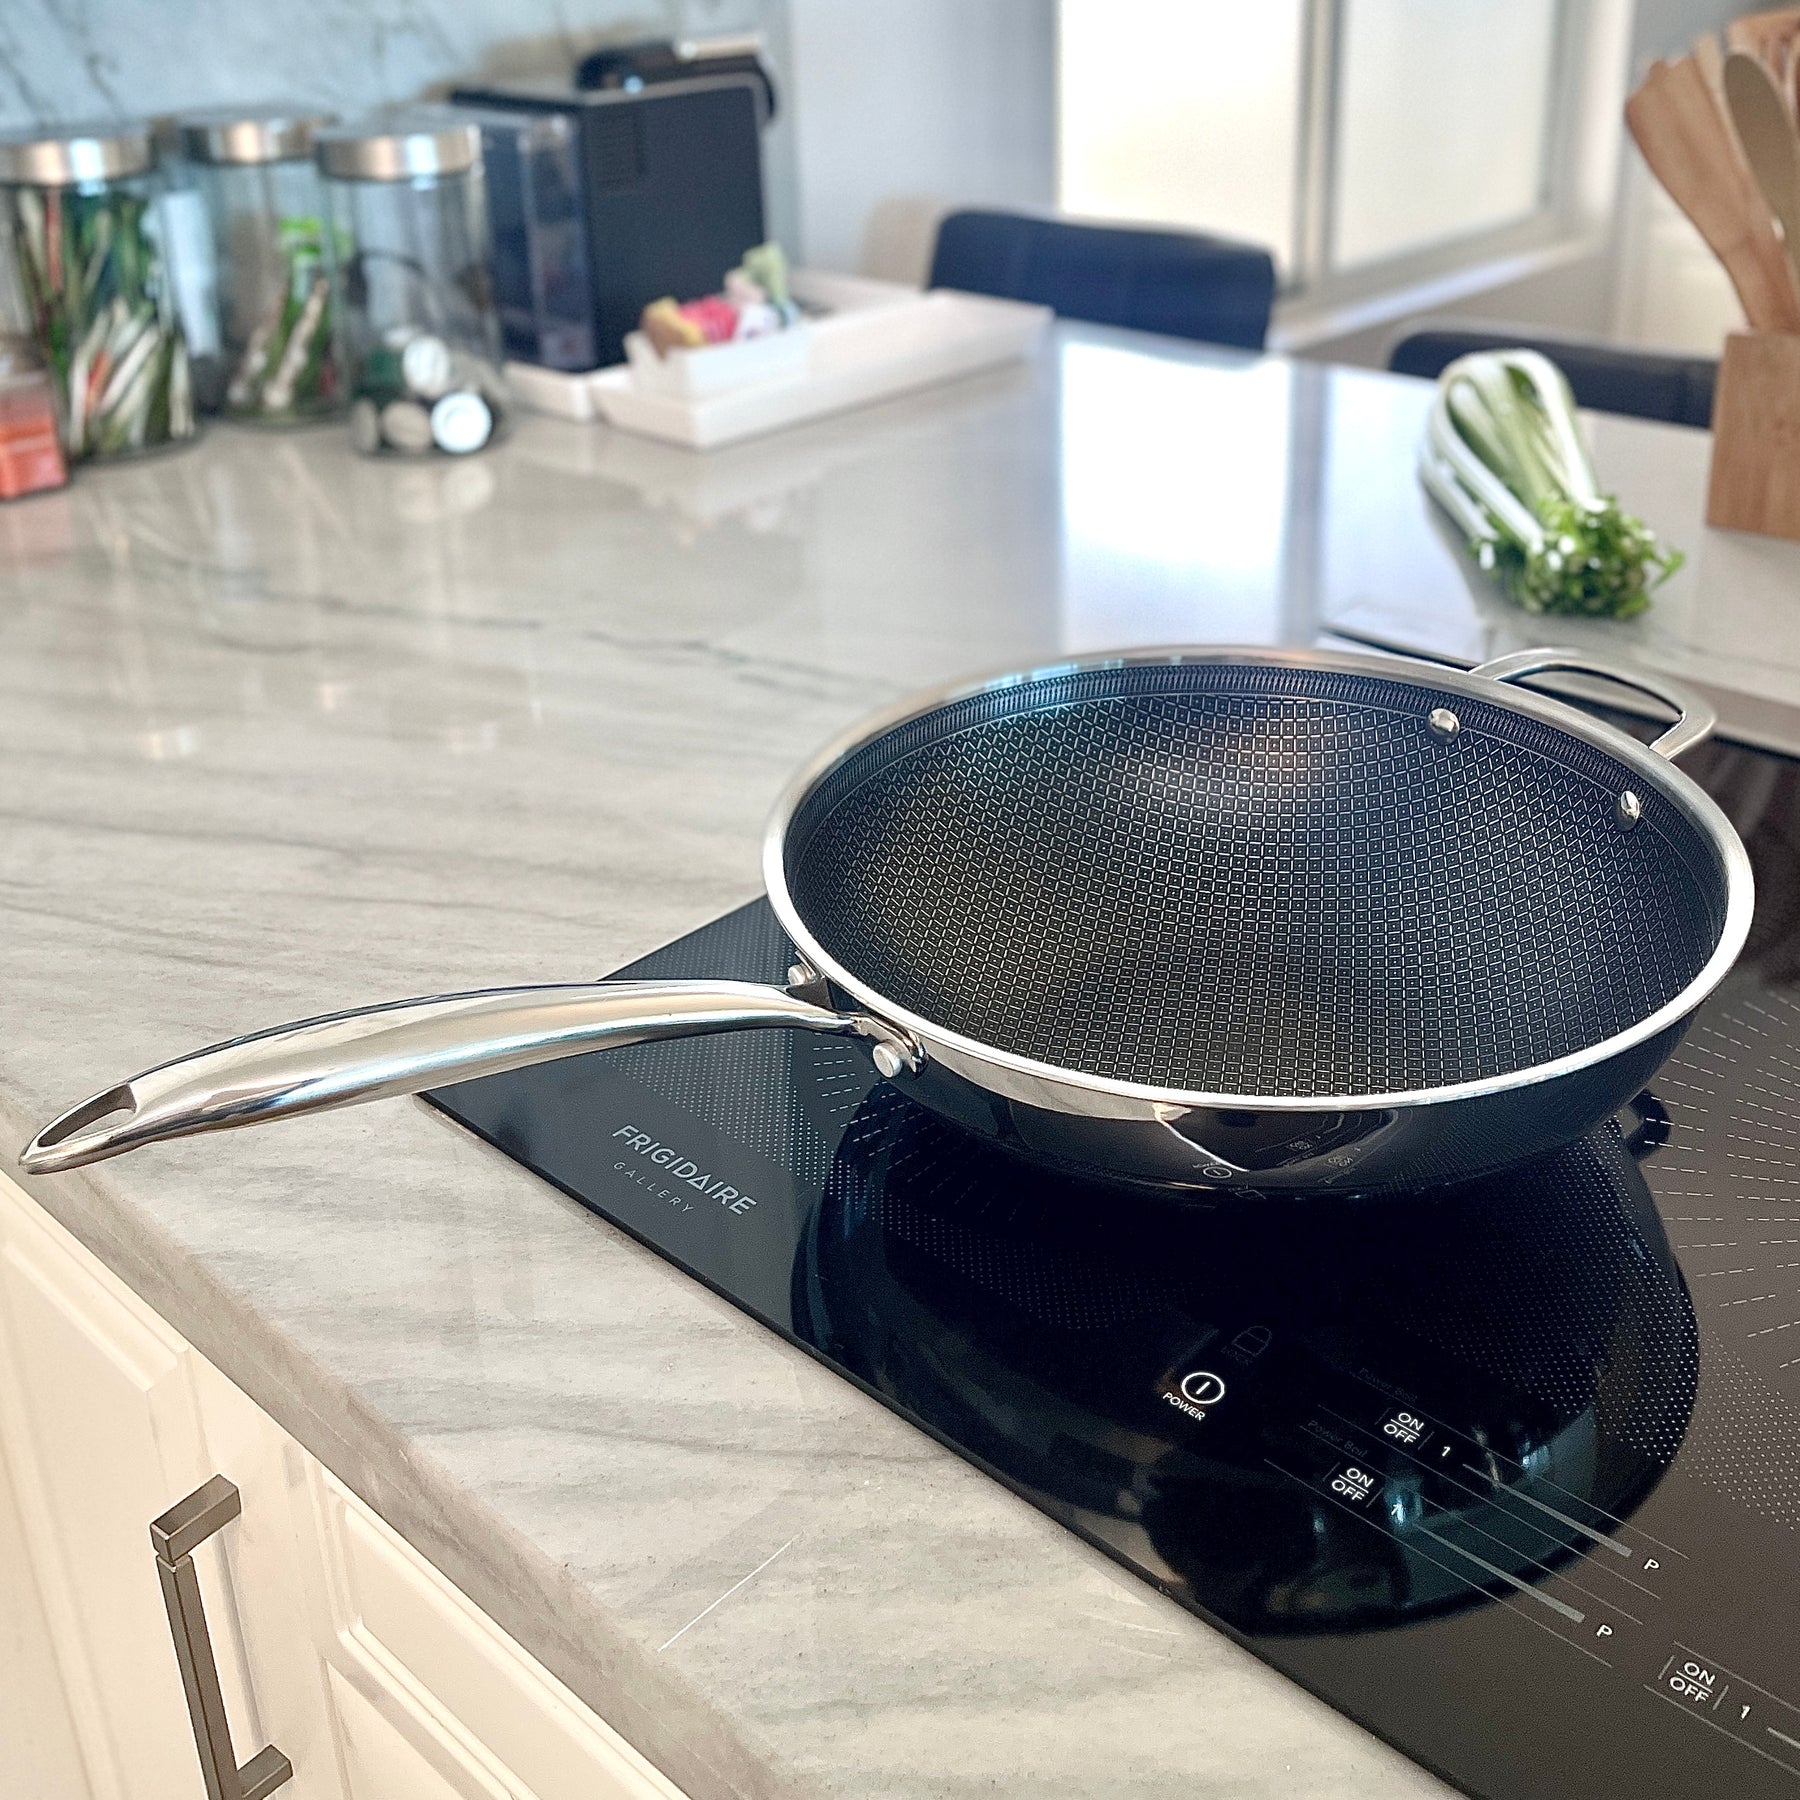 HexClad Hybrid Nonstick Wok, 10-Inch, Stay-Cool Handle, Dishwasher Safe,  Induction Ready, Compatible with All Cooktops: Home & Kitchen 